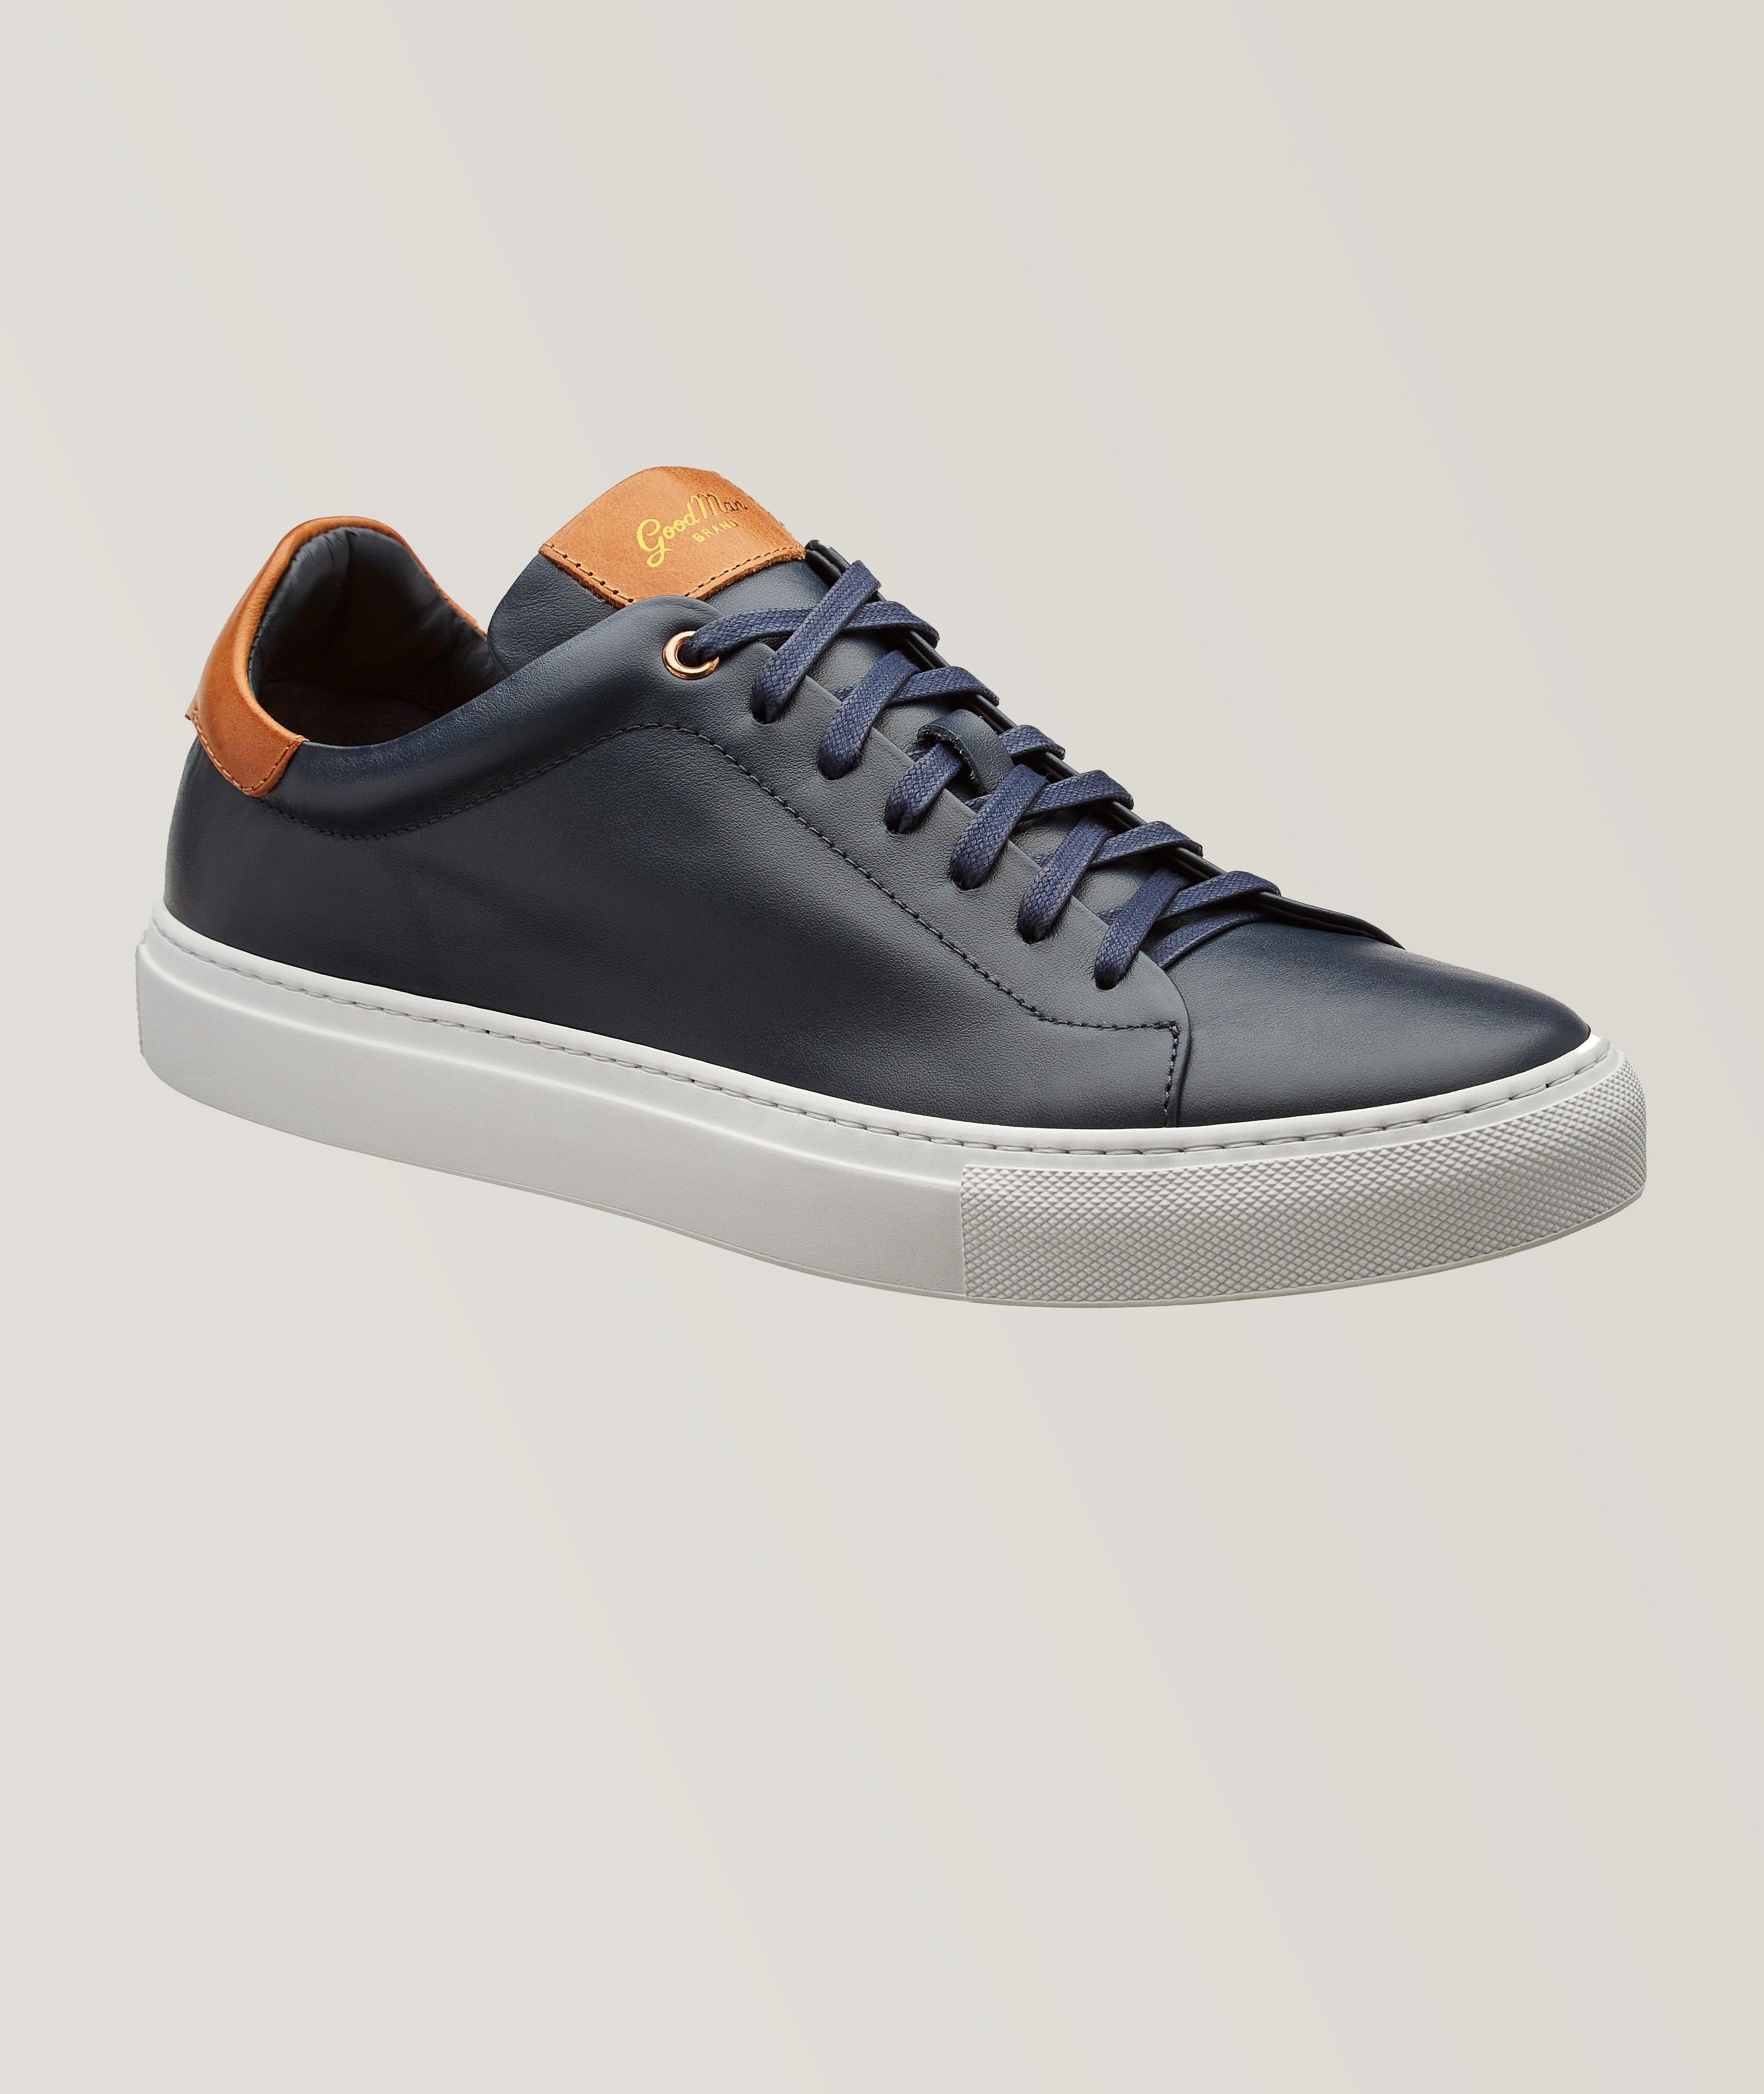 Legend Leather Sneakers image 0